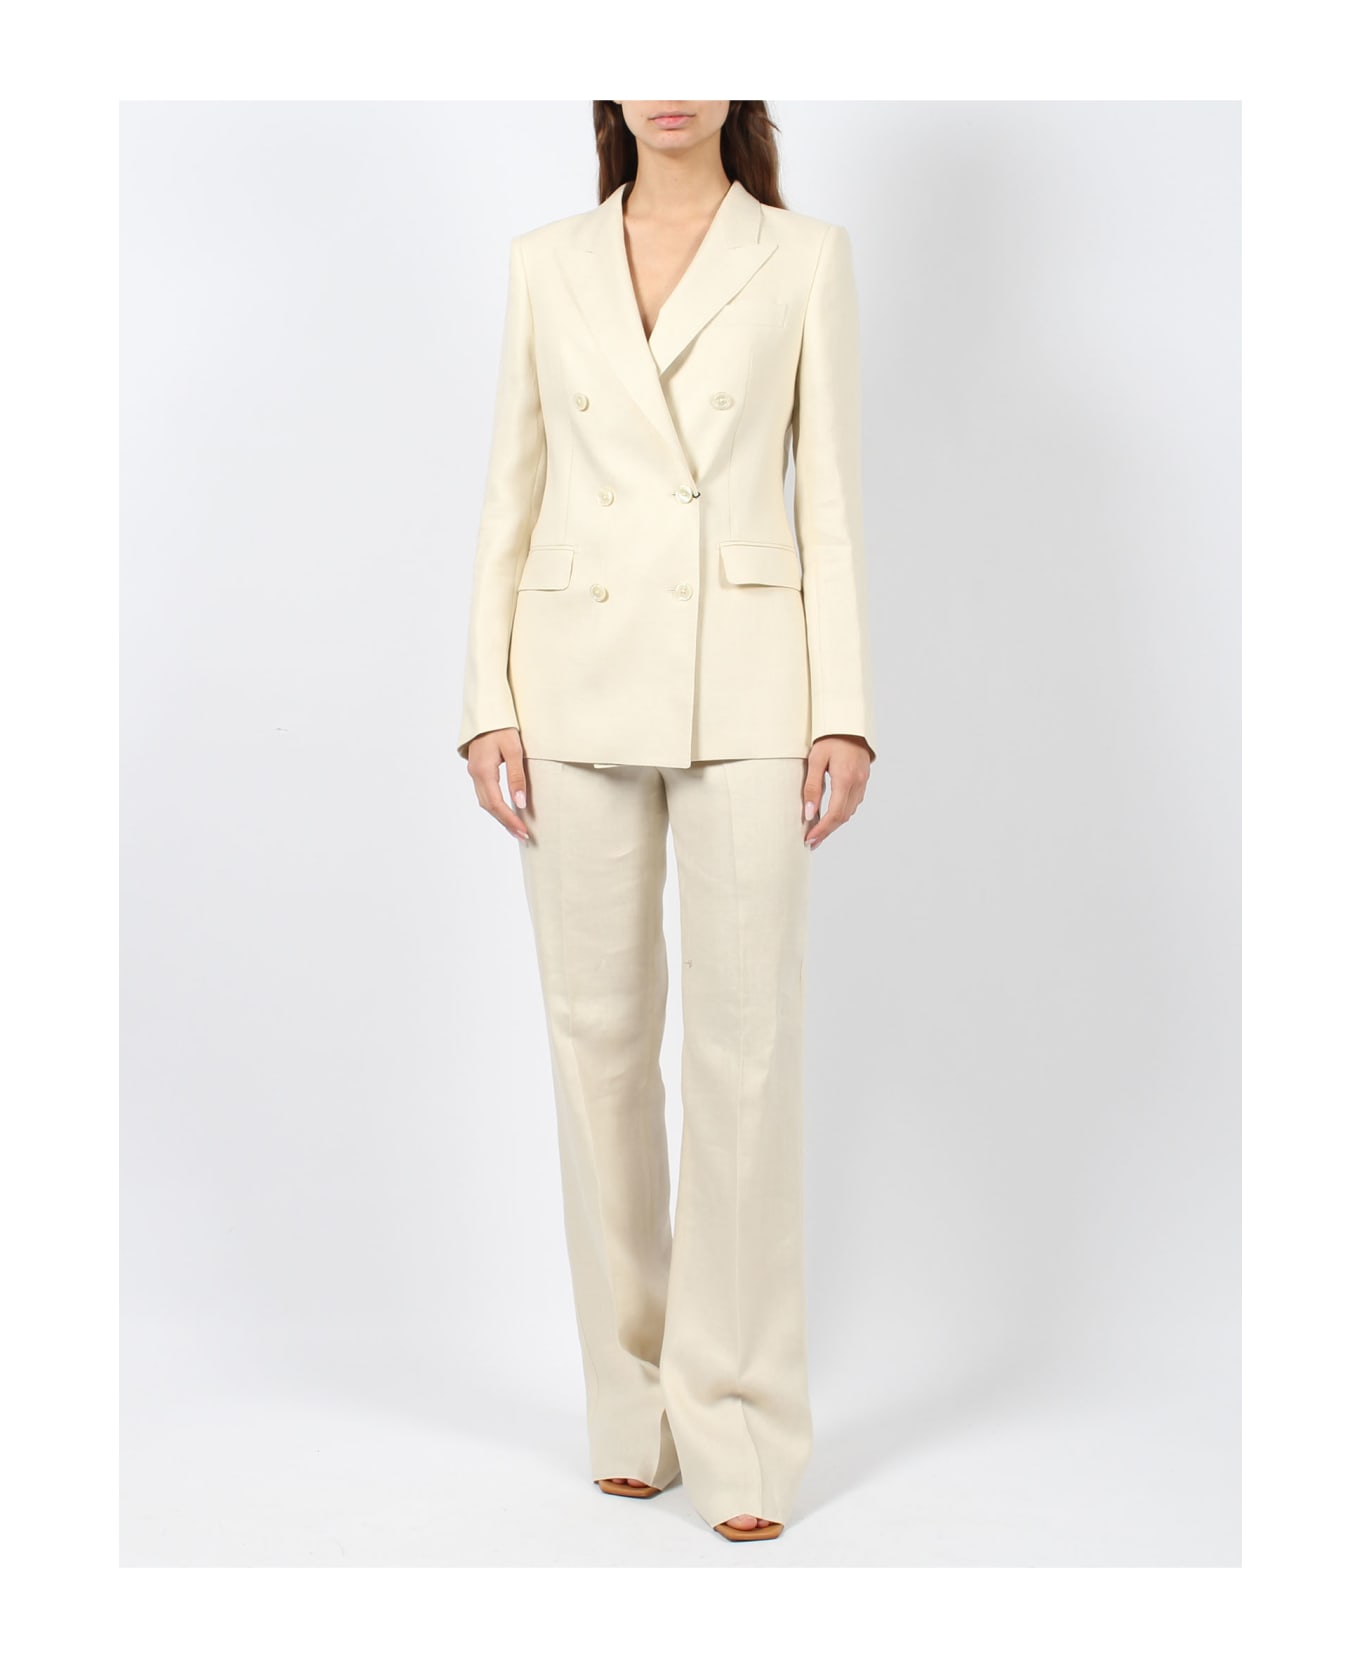 Tagliatore Linen Double Breasted Suit - Nude & Neutrals